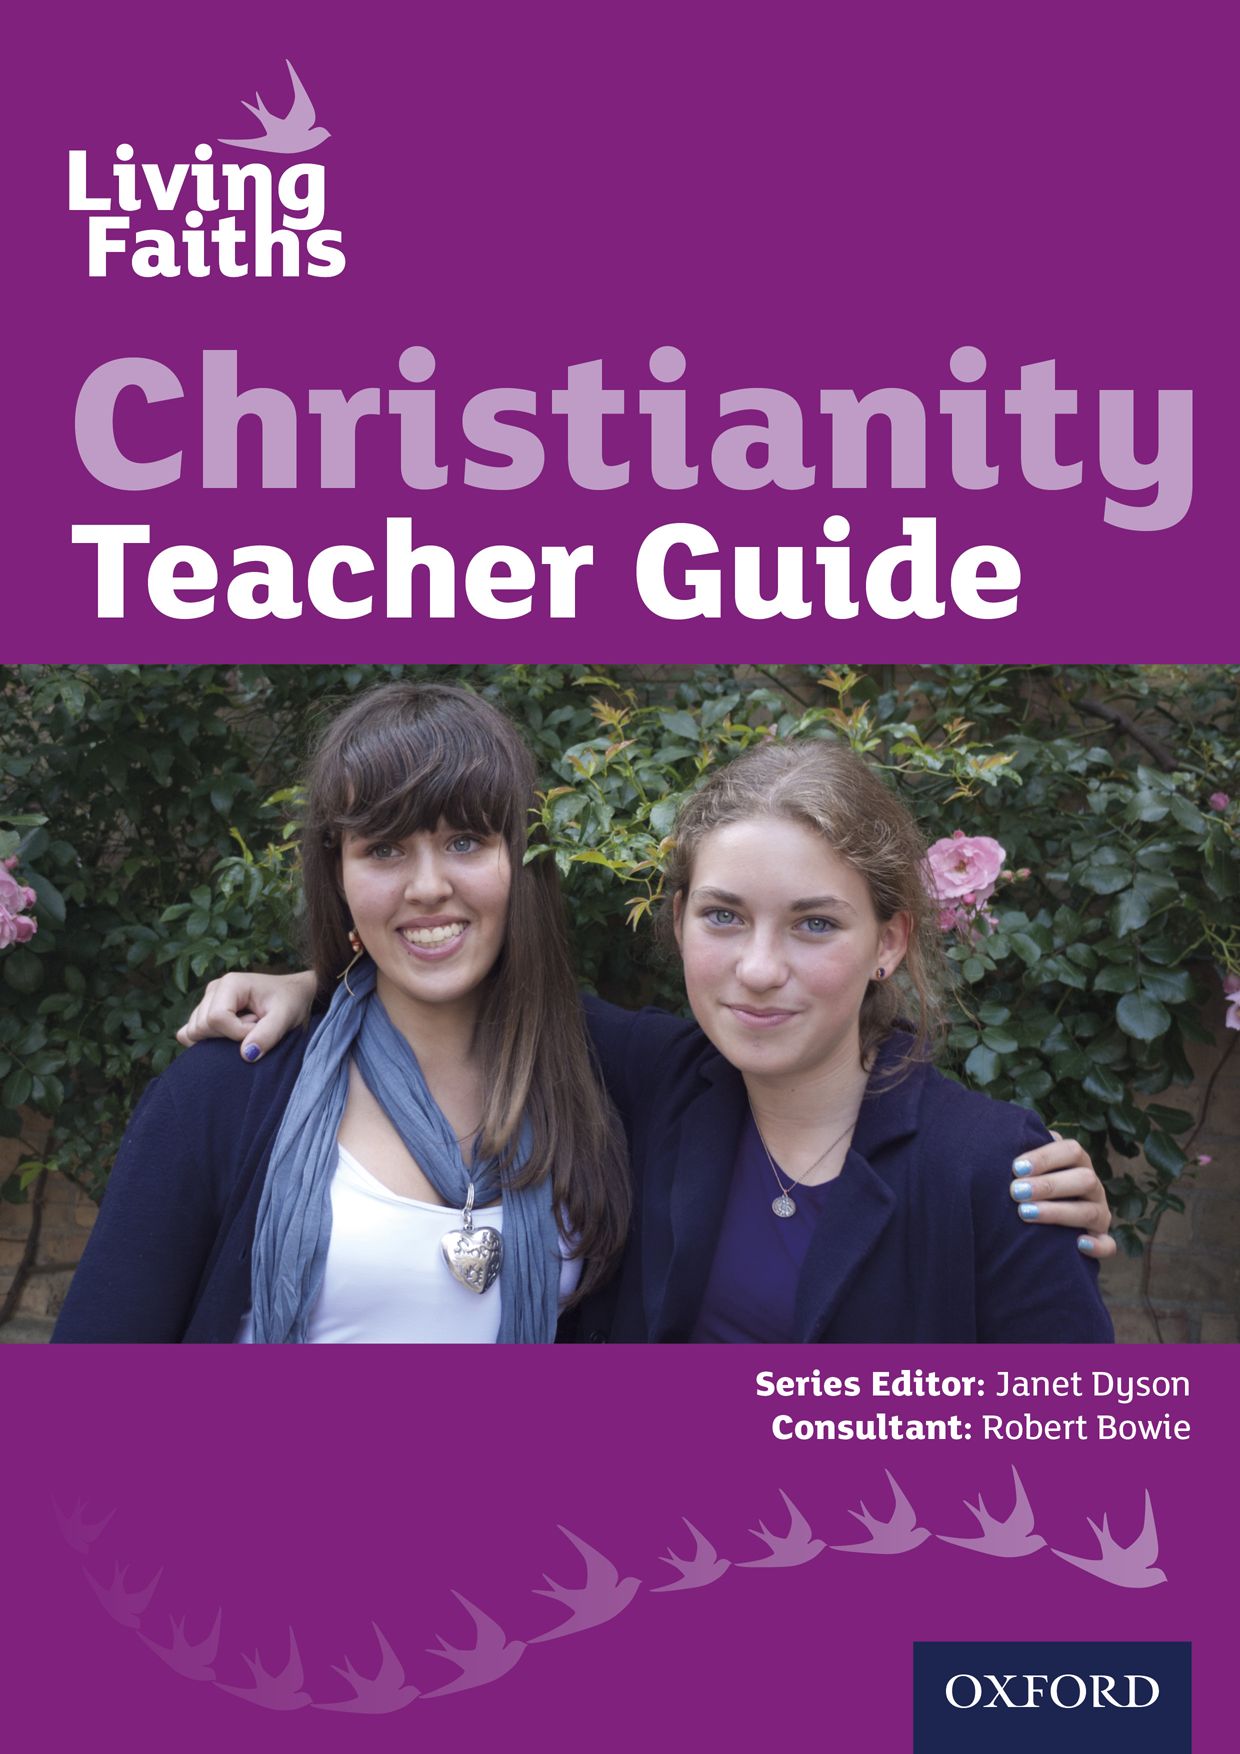 Featured image for “Living Faiths Christianity Teacher Guide”